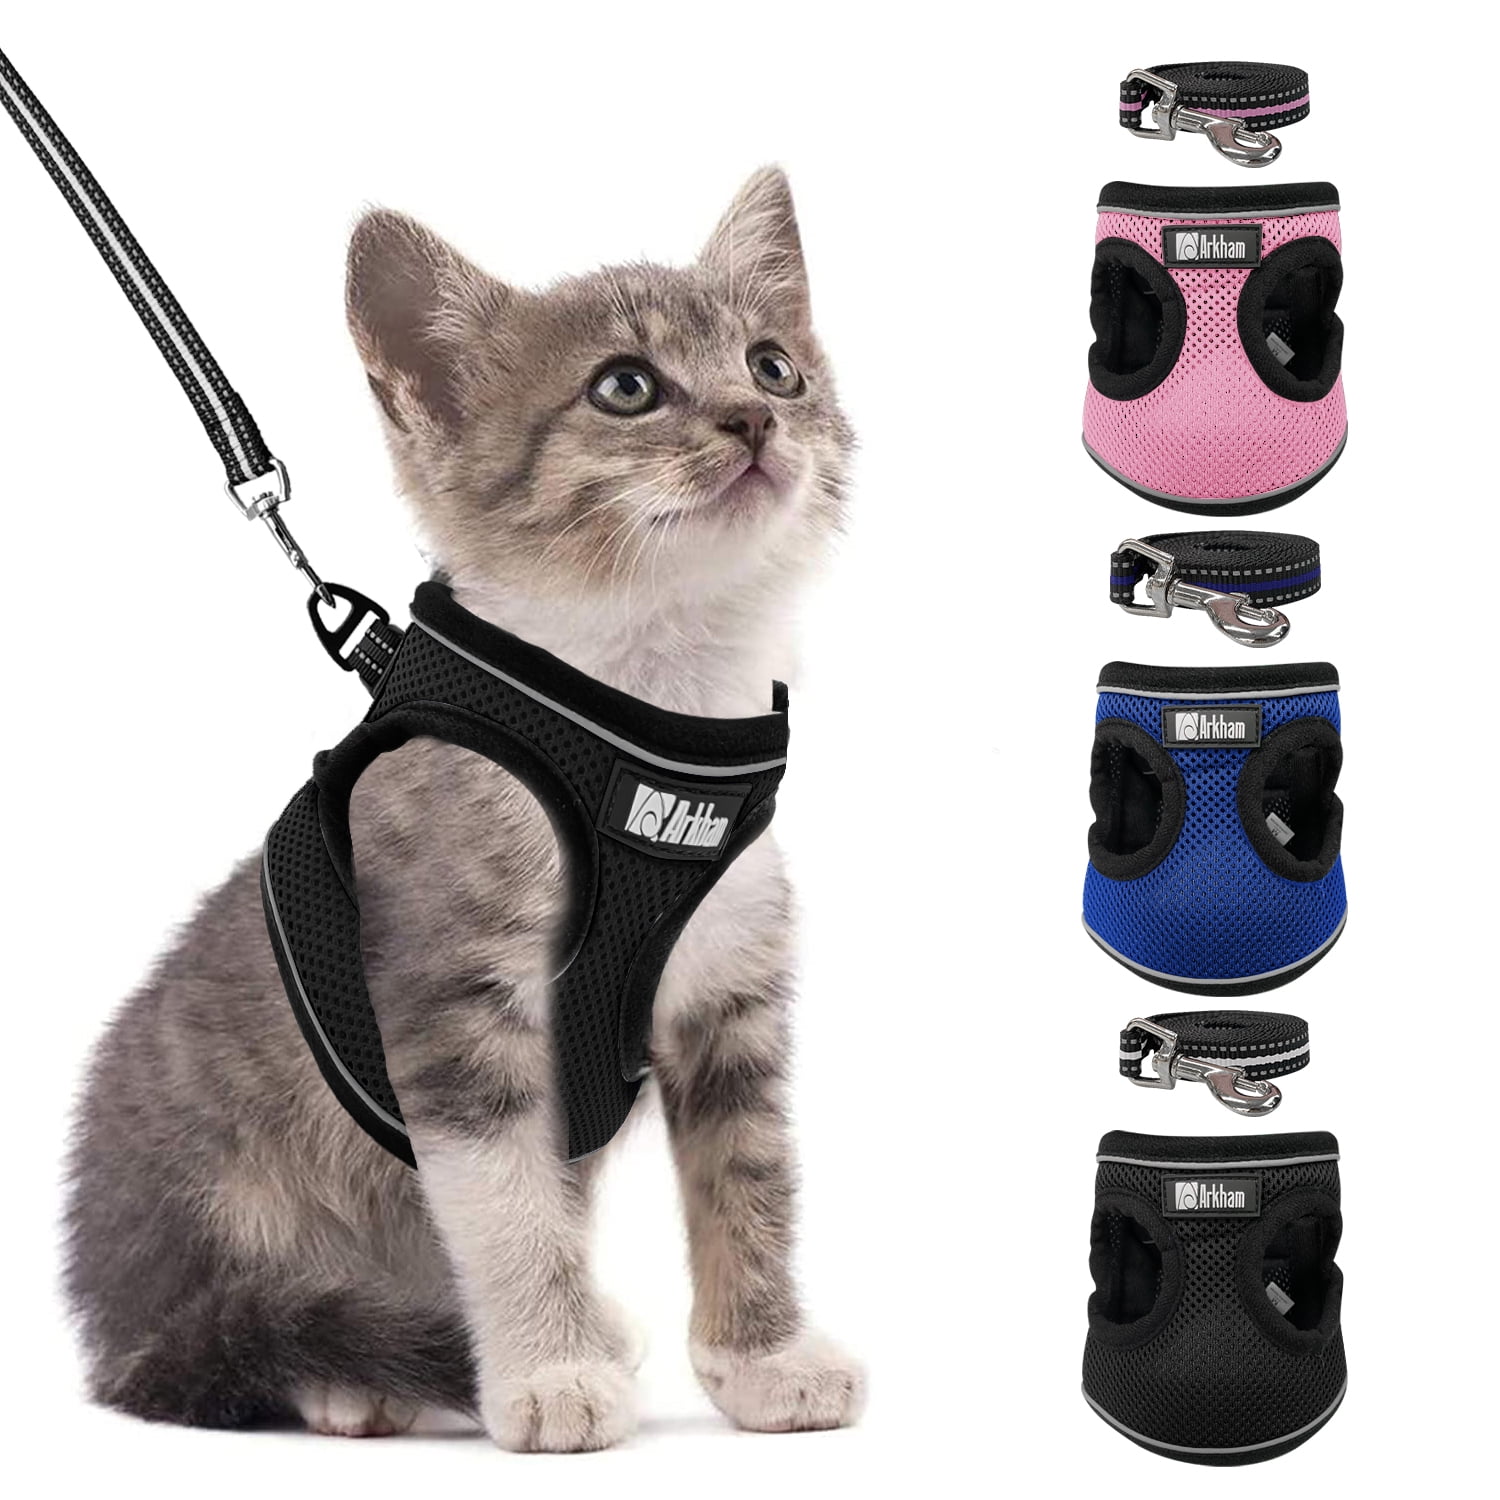 Cat Harness and Leash Kitten Harness Dog Harness Escape Proof,Pet Supplies for Small Medium Cats Dogs Lifetime Replacement Adjustable Cat Leash and Harness Set-L 